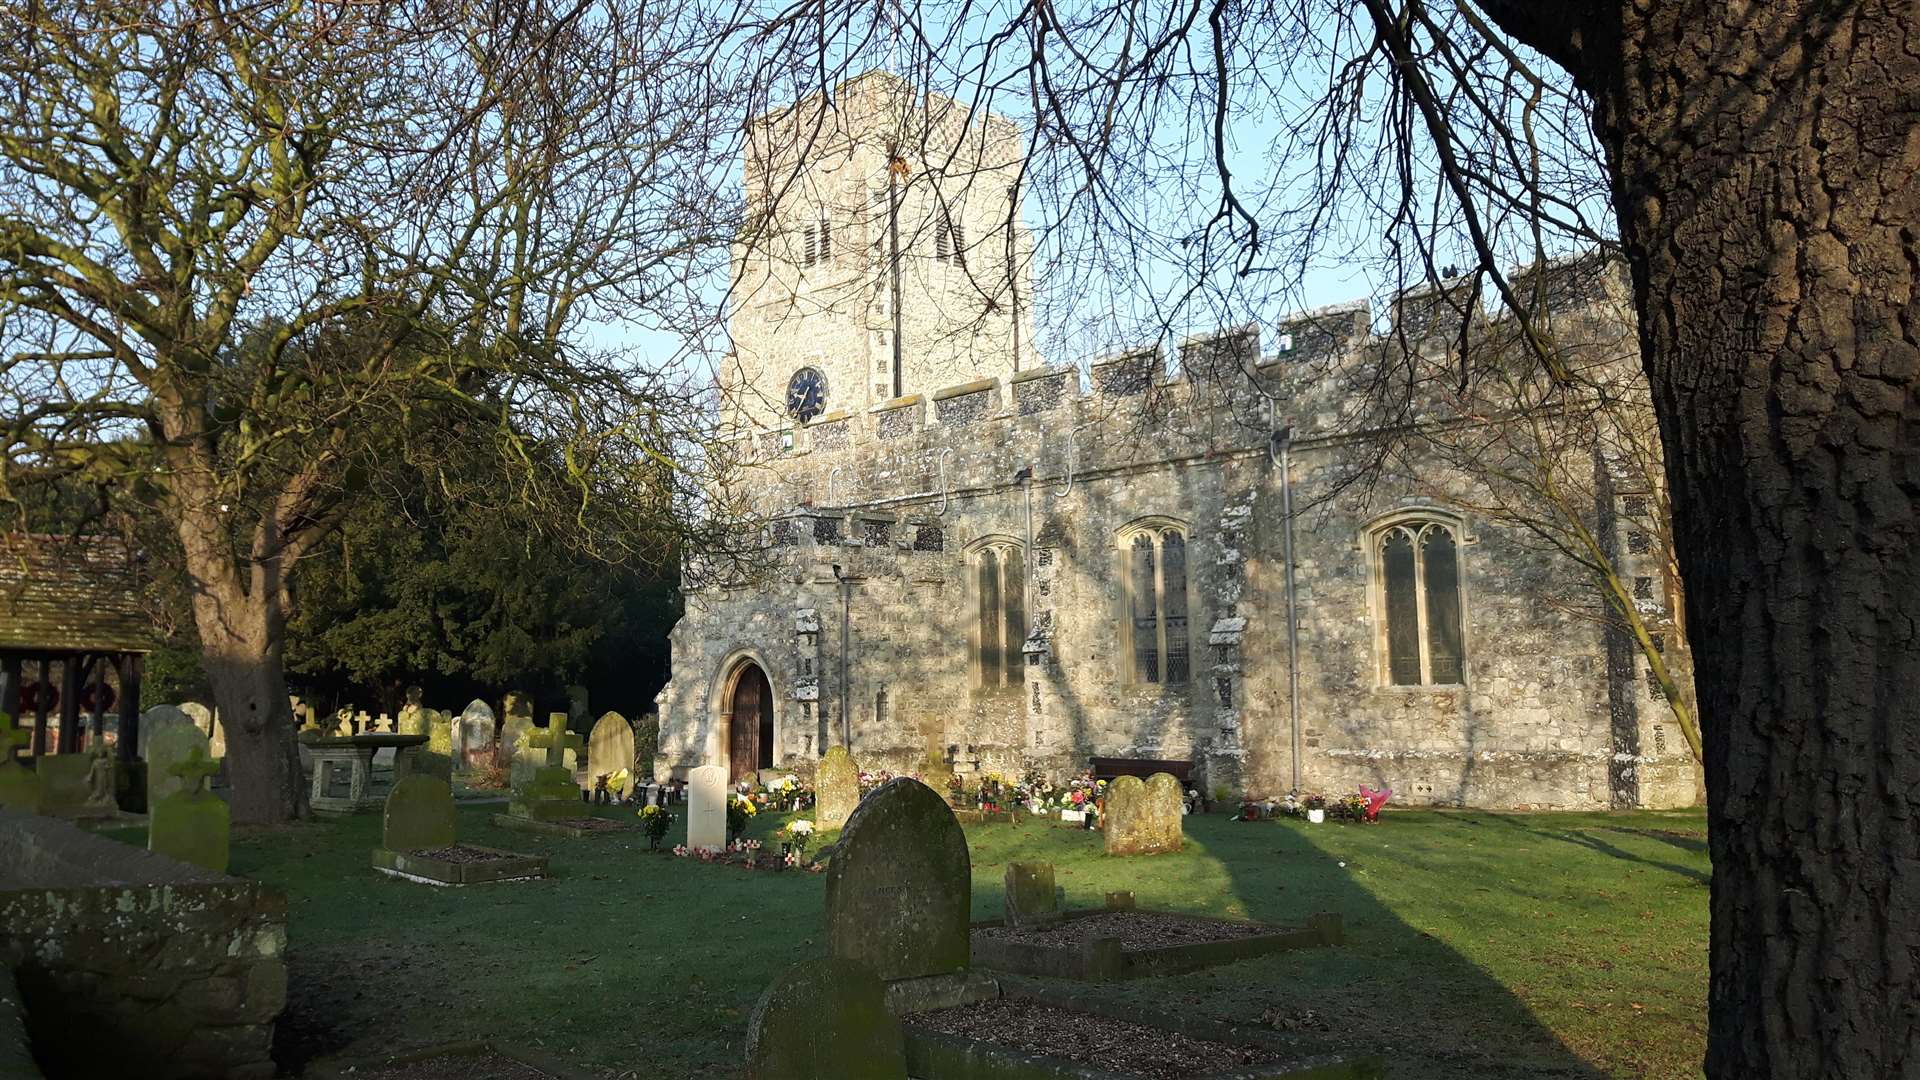 All Saints Church, Eastchurch, on the Isle of Sheppey (3669772)